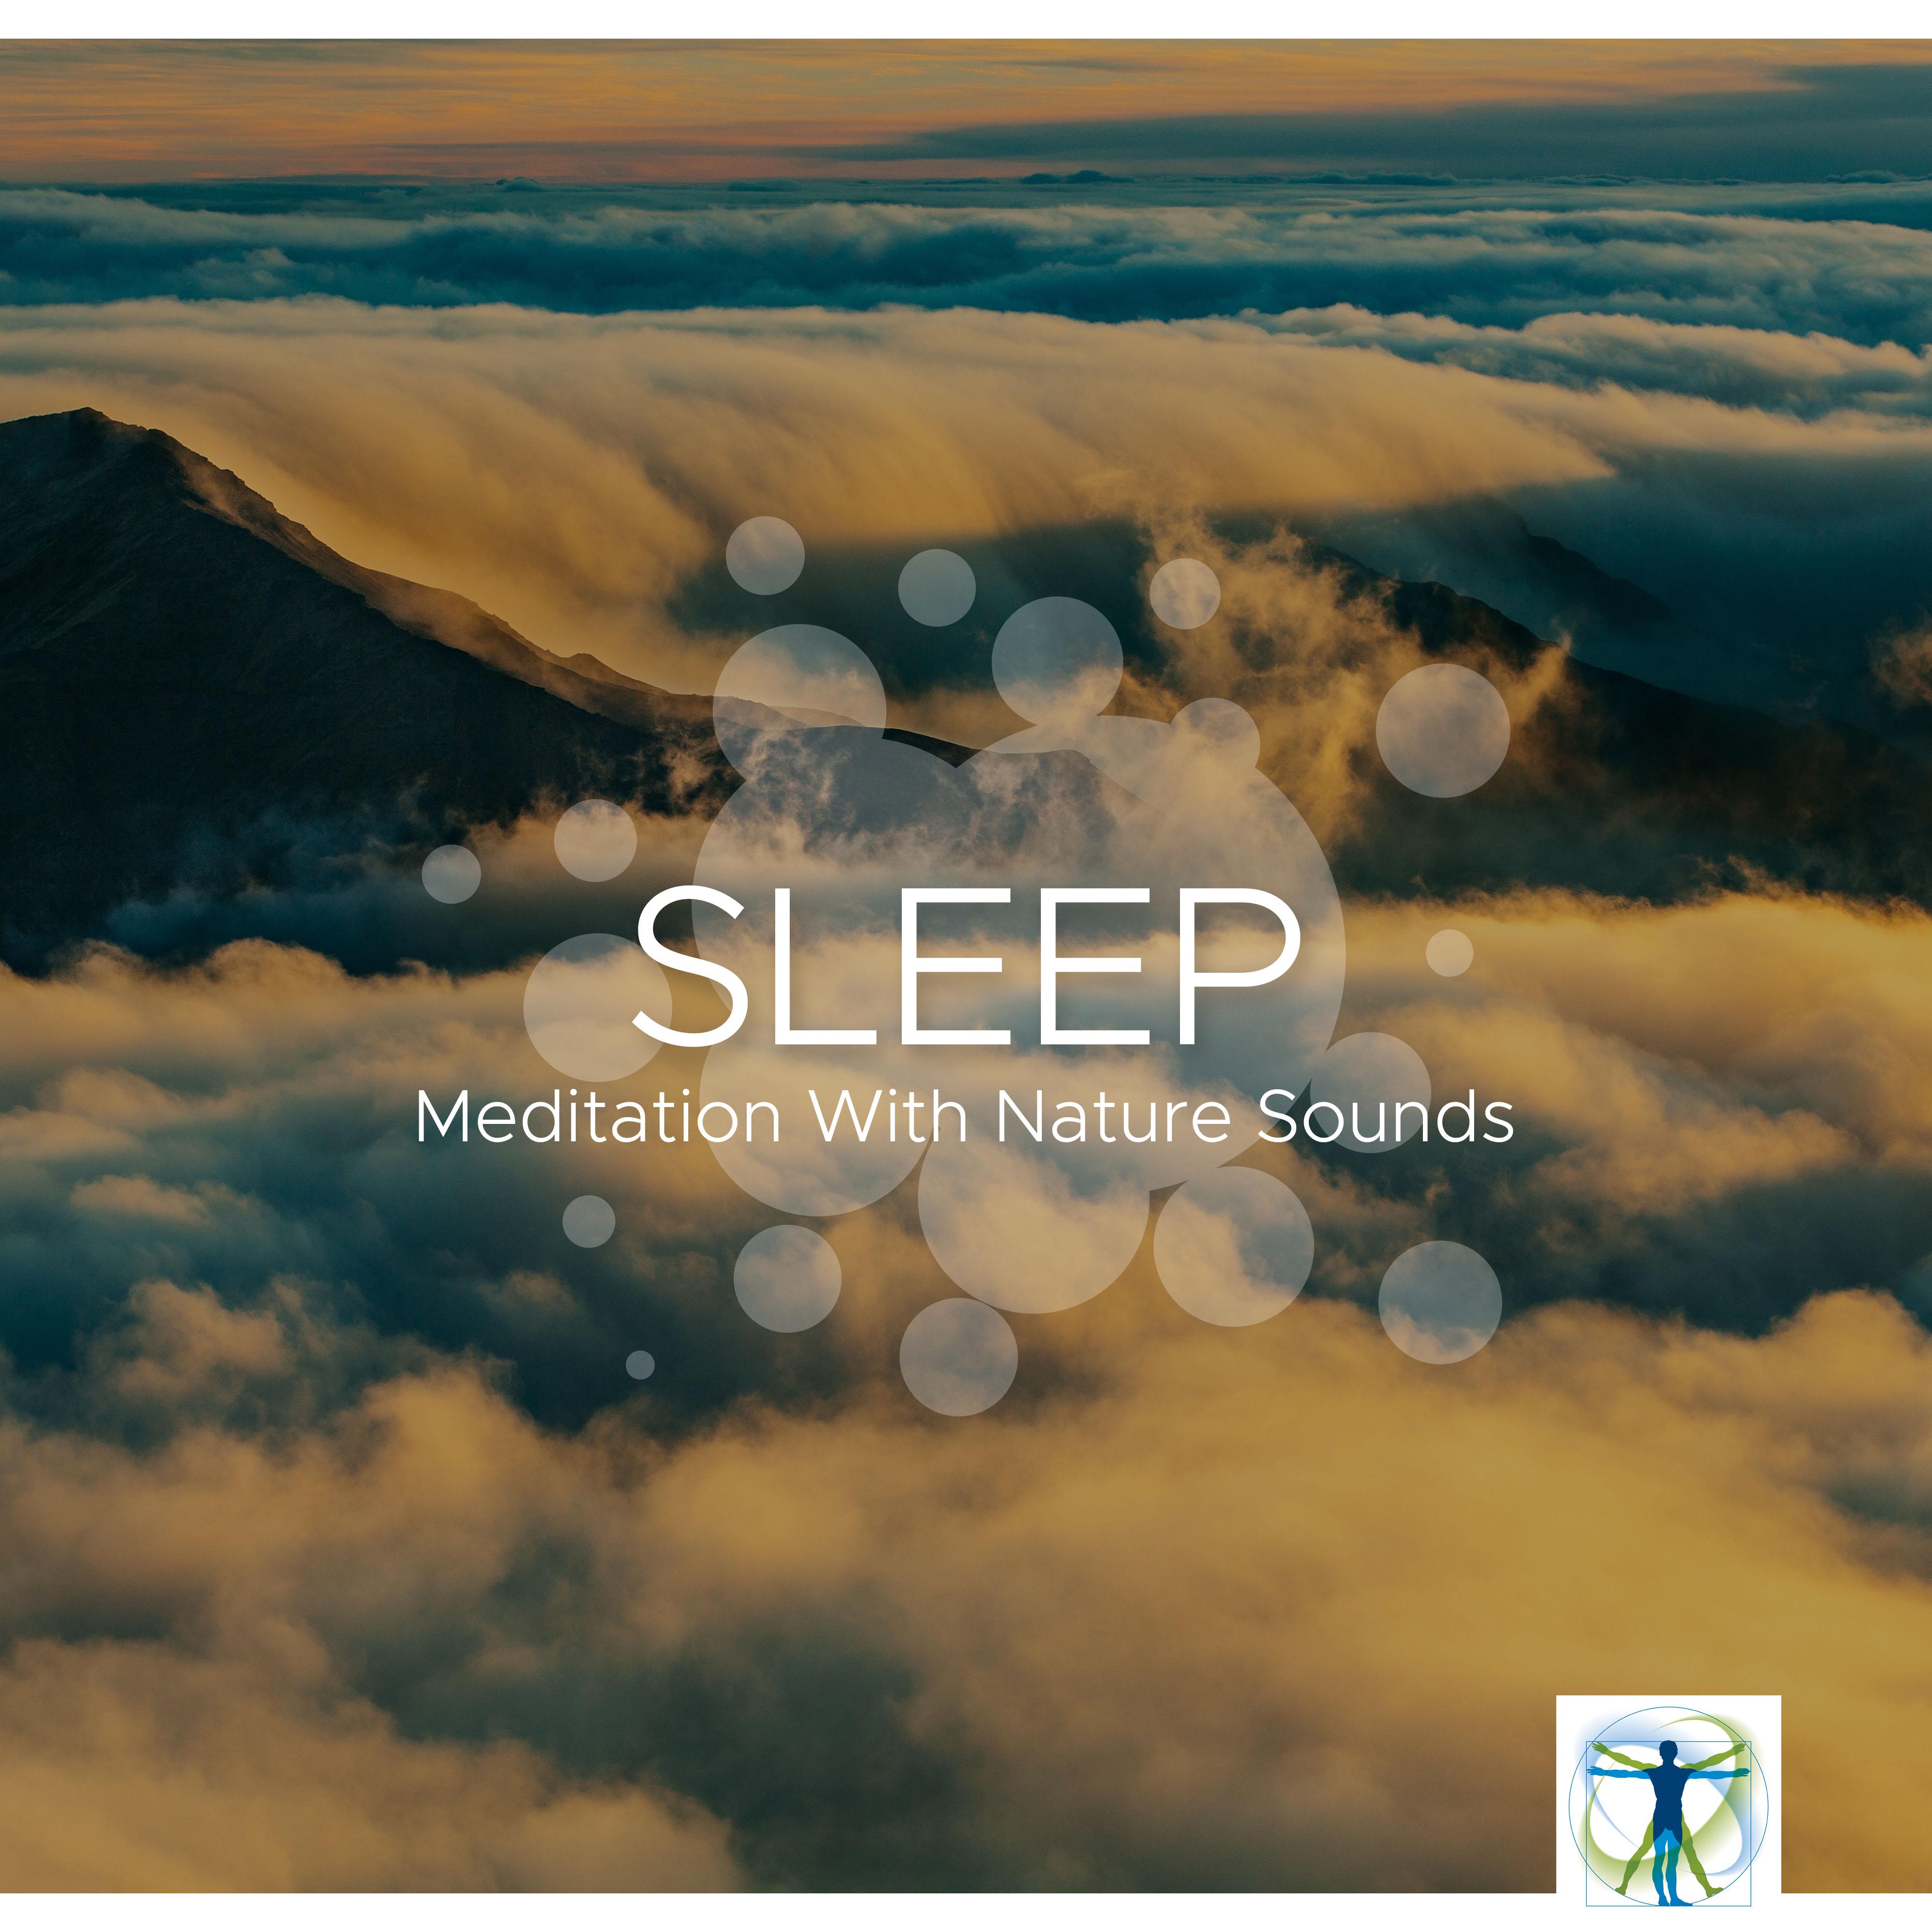 Sleep: Meditation With Nature Sounds, Gentle Sound of Rain, Ocean Waves and Tranquil Music All Night Long